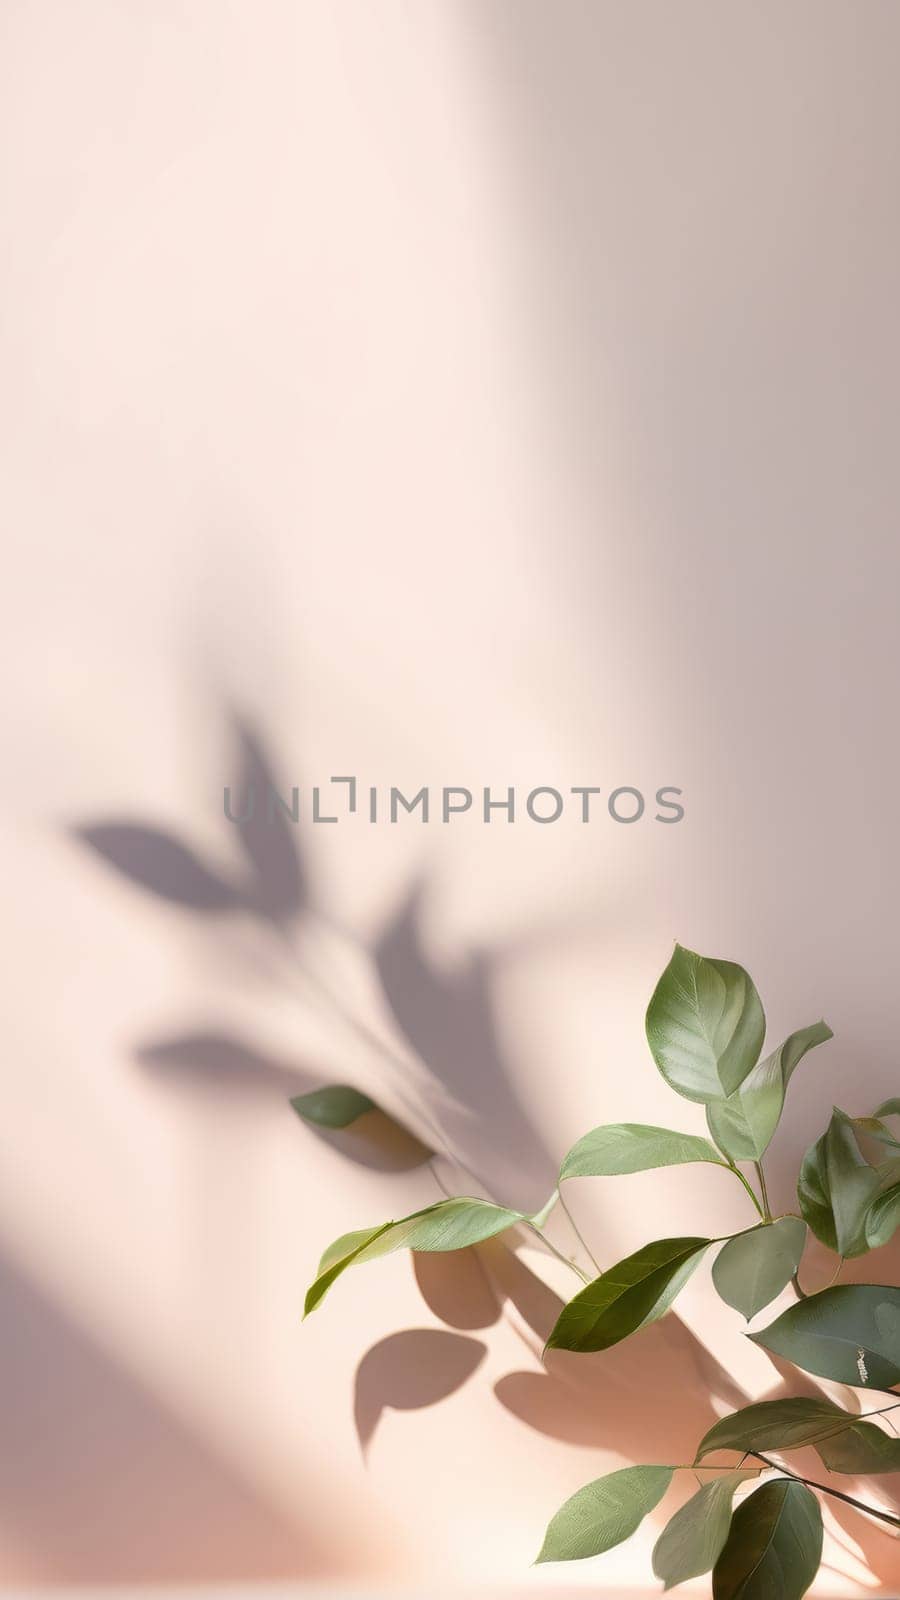 Minimalistic abstract gentle light beige wall background for product presentation or social media stories backdrop template. Green leaves aesthetic with beautiful light and intricate shadow. Vertical